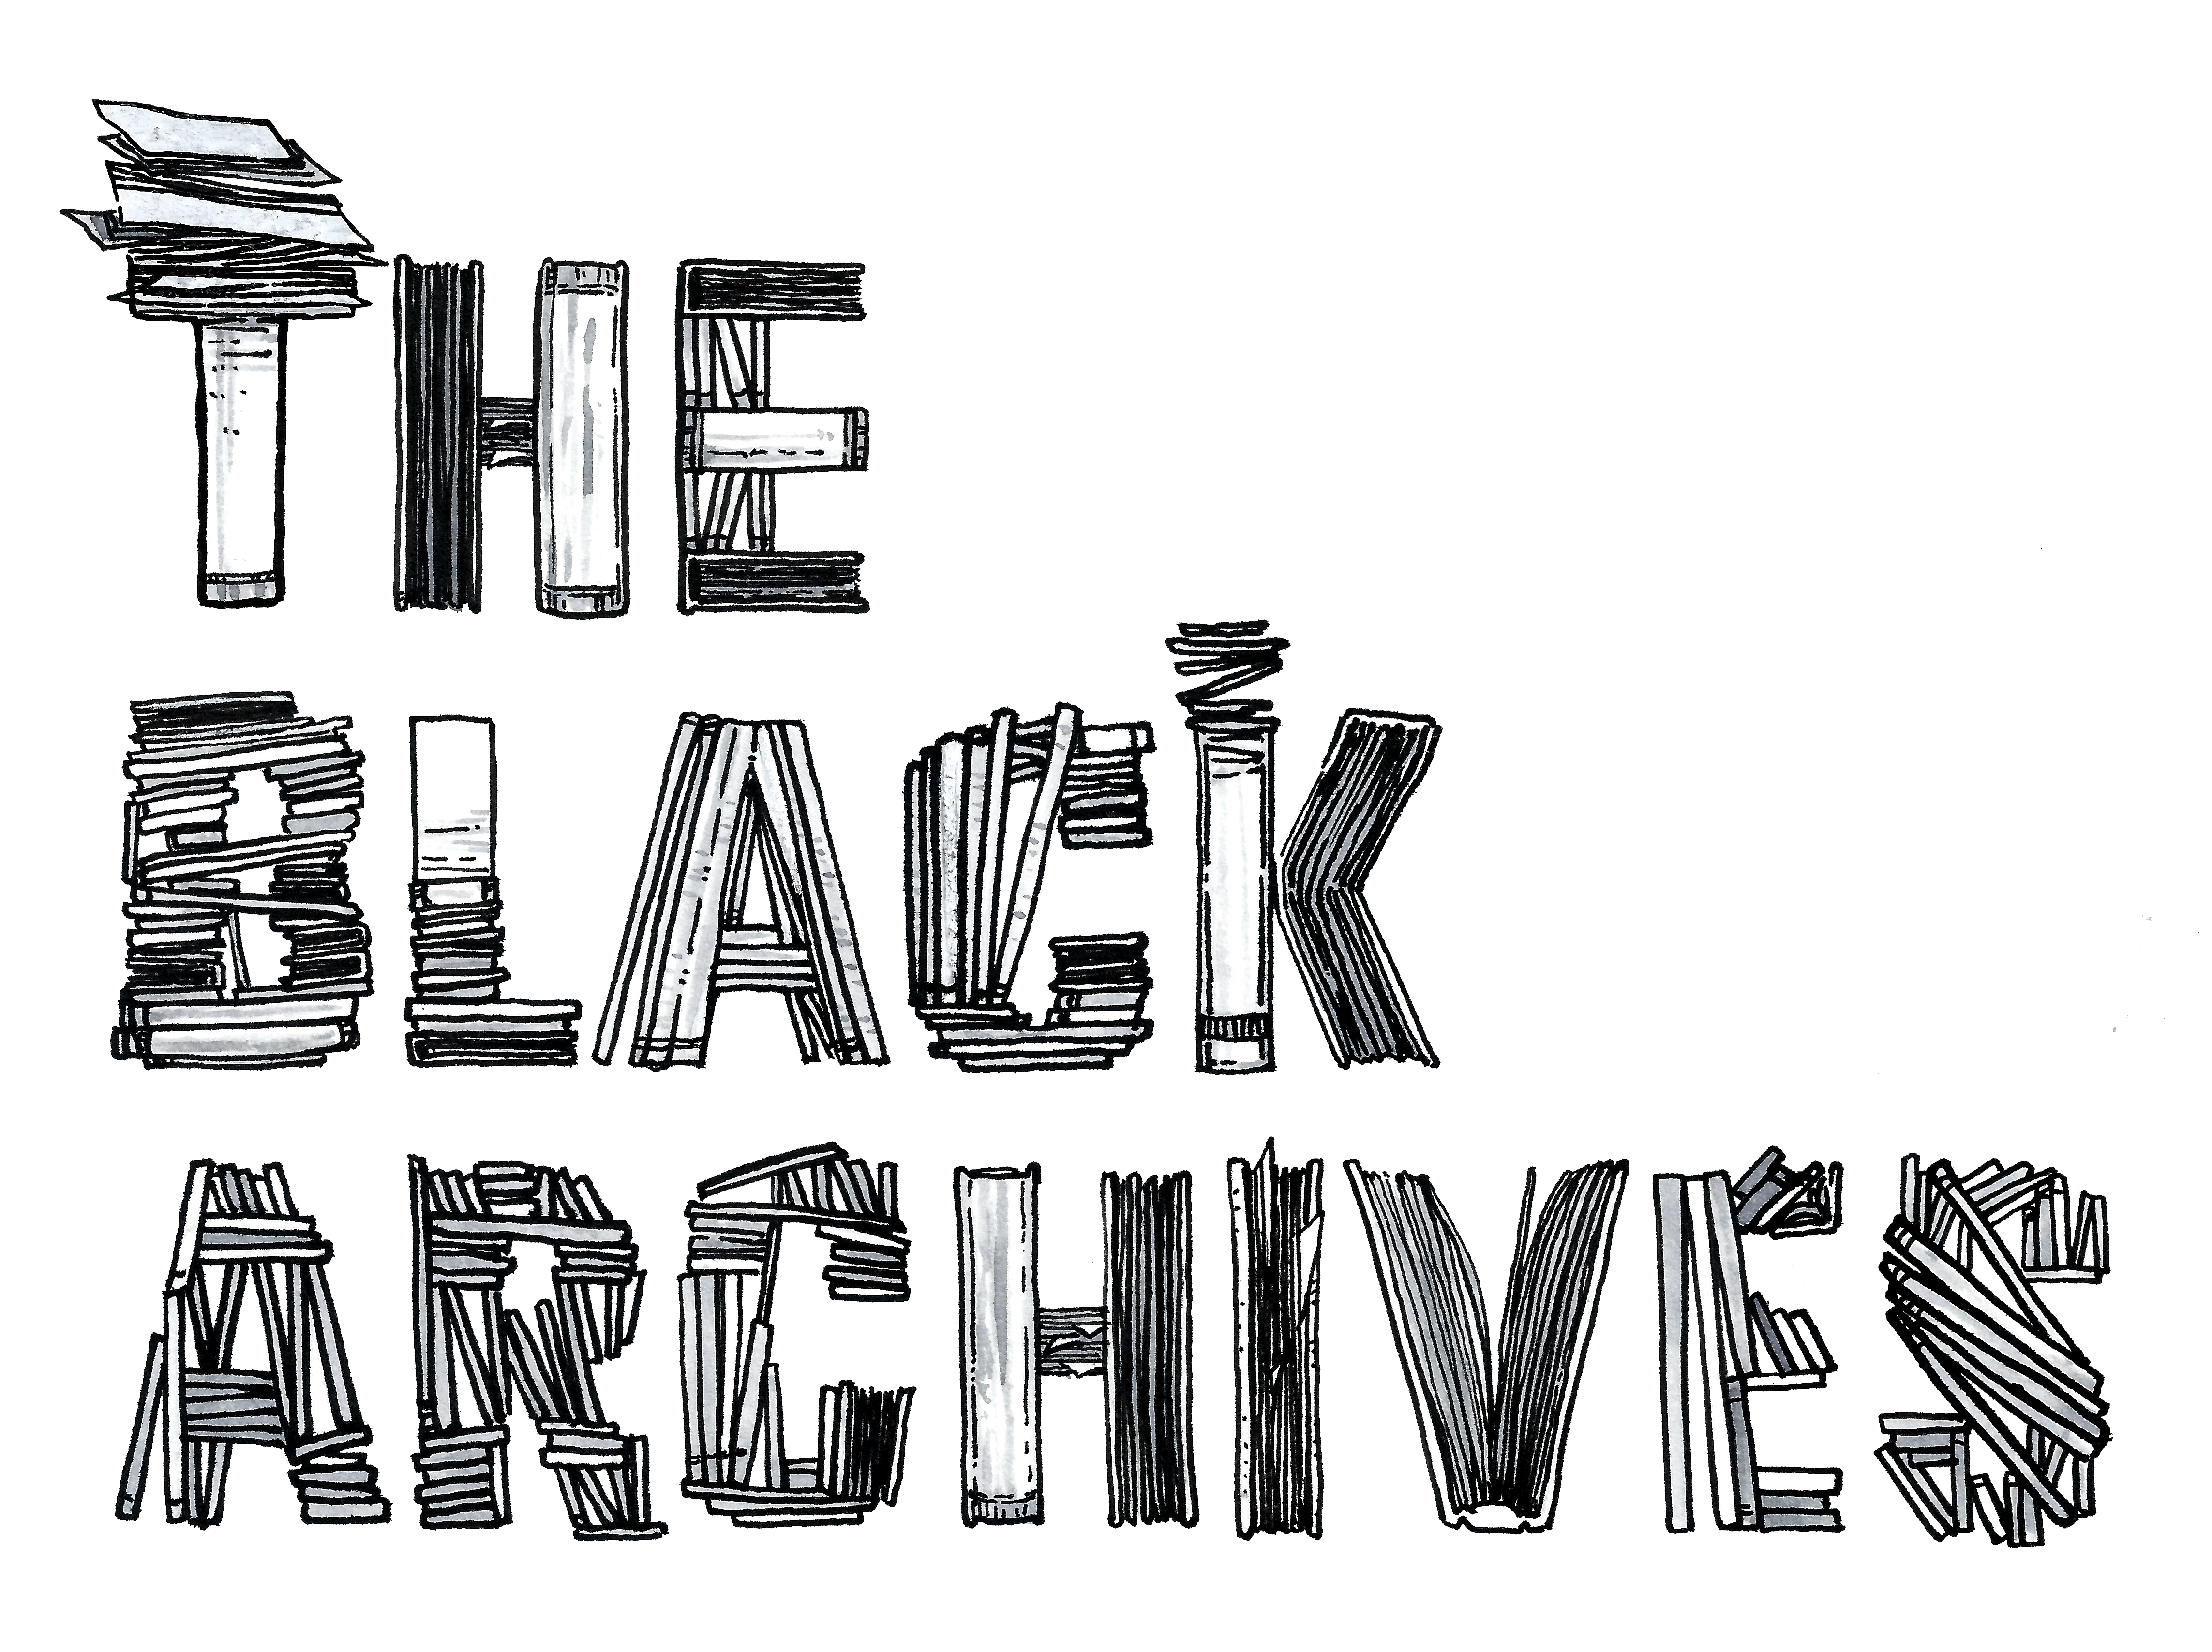 DAY13_TheBlackArchives